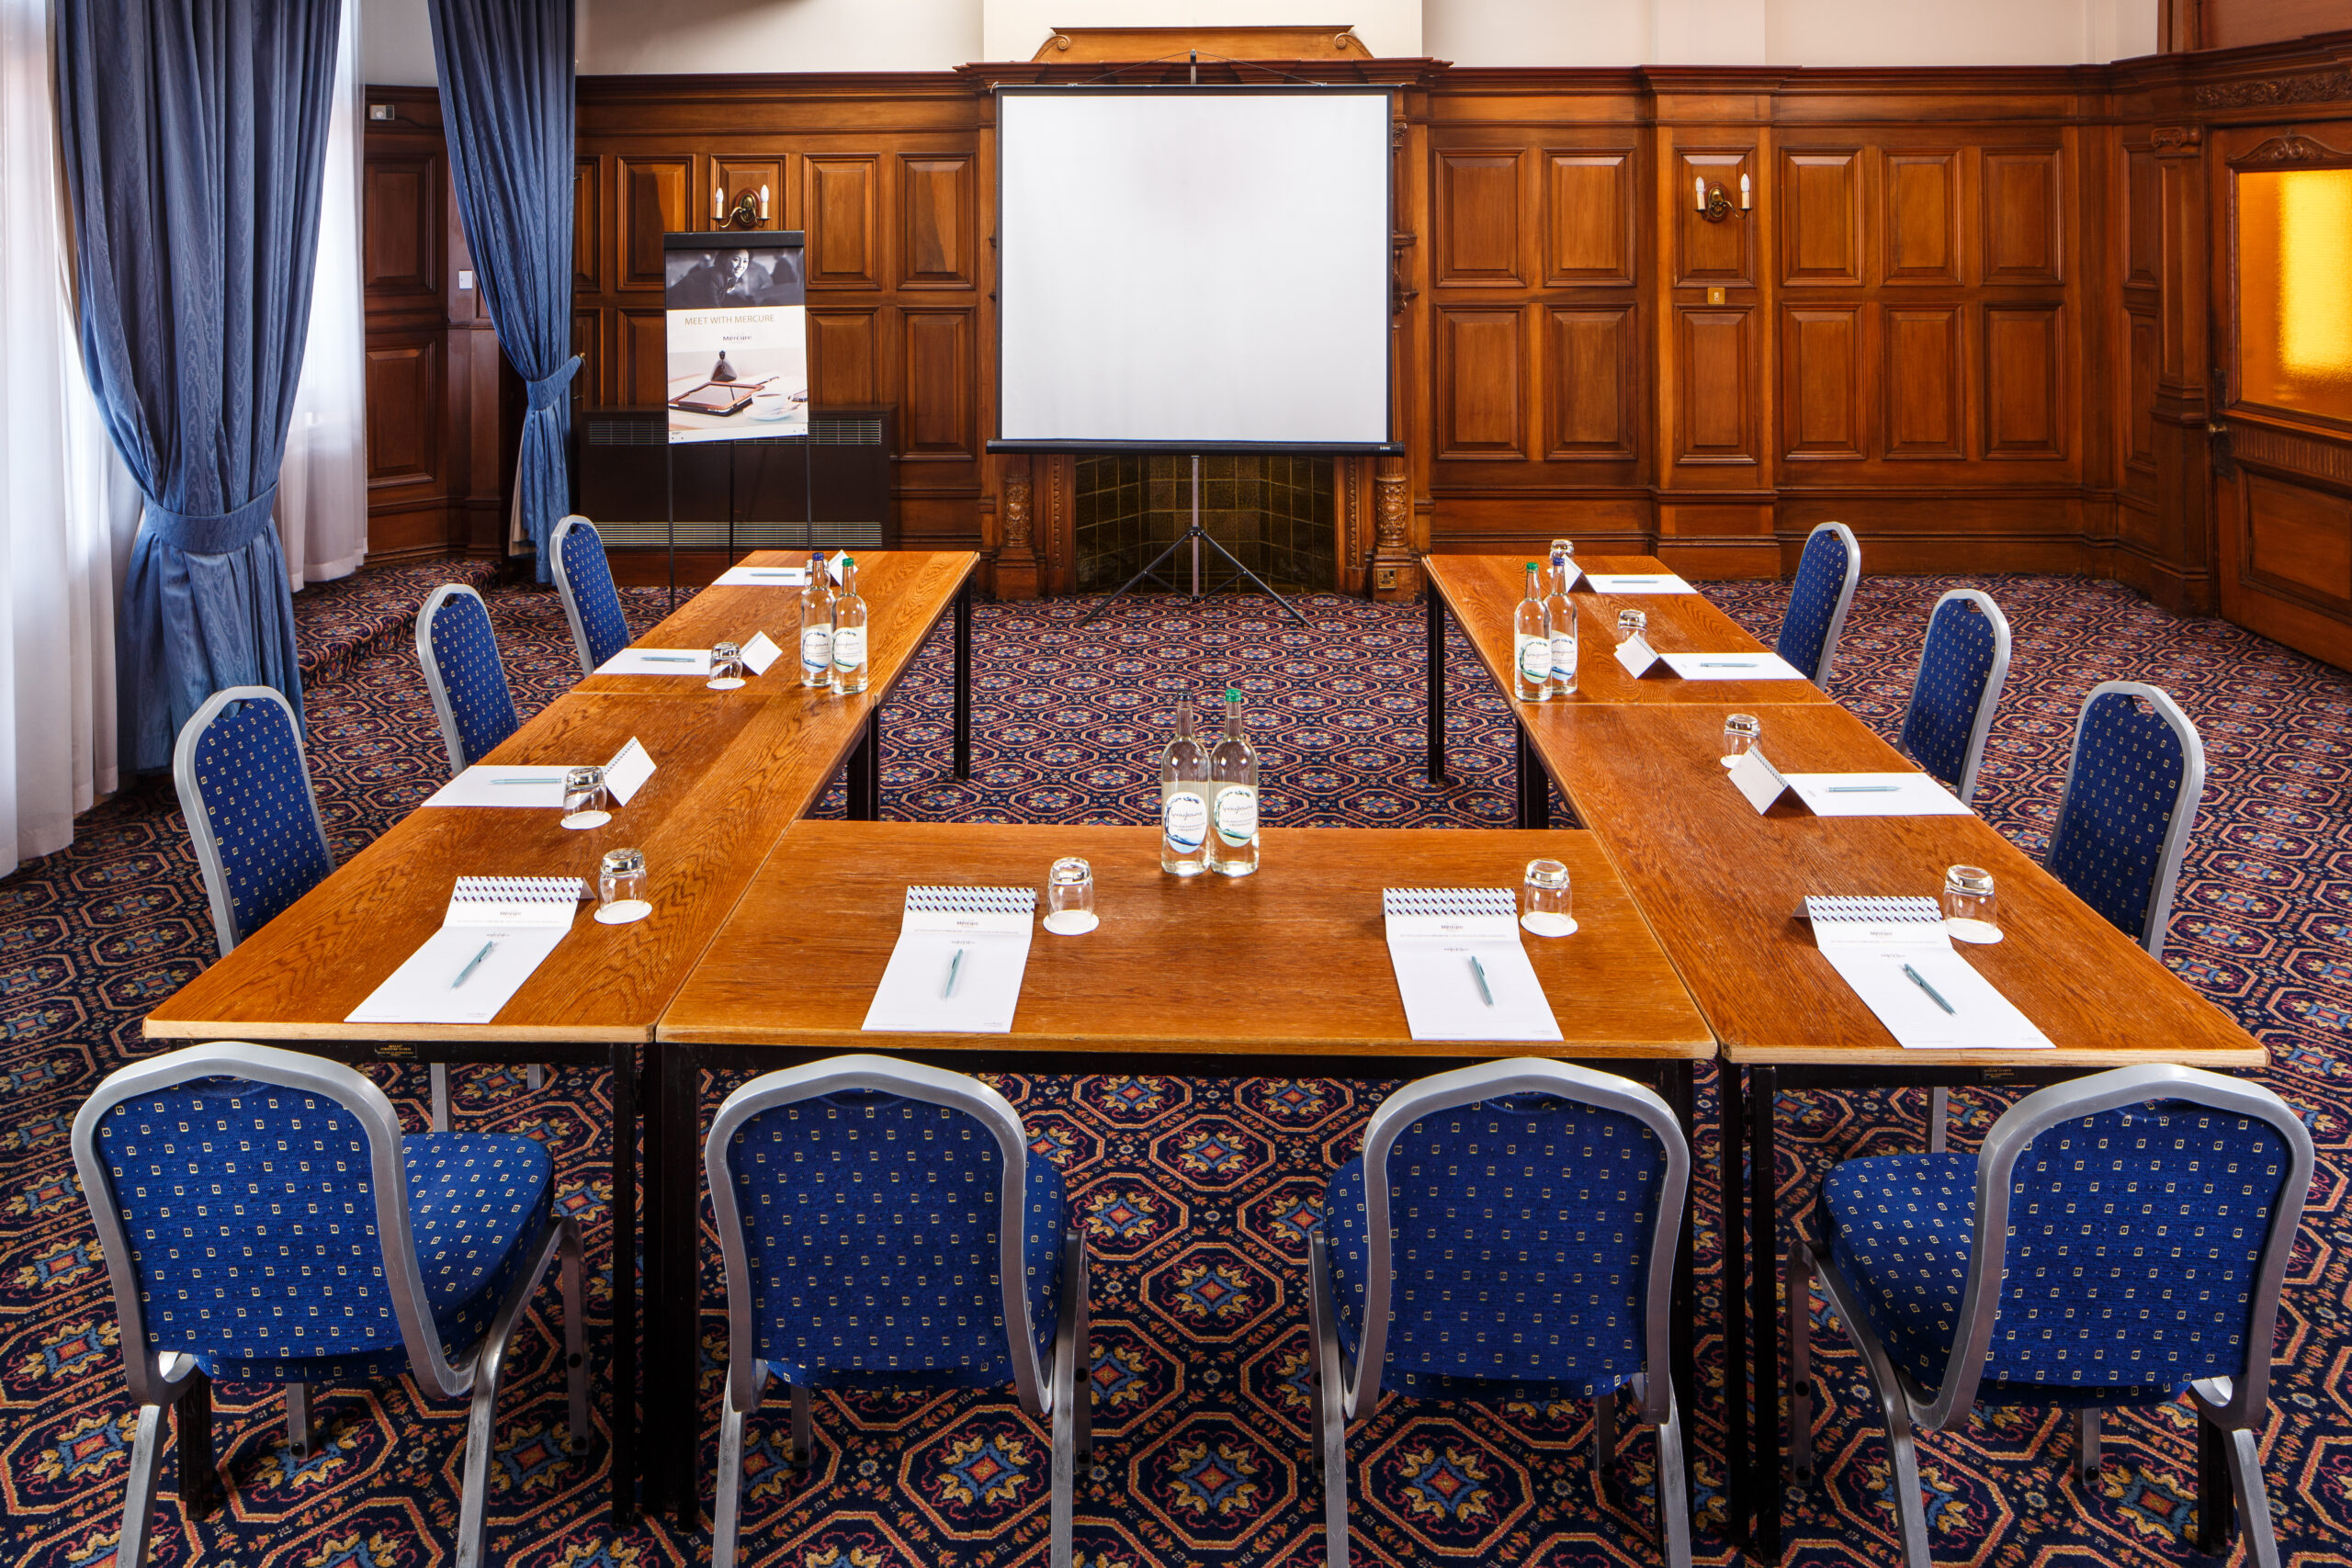 The long table seating 10 in The Boardroom at mercure gloucester bowden hall hotel ready for a meeting, with notepads and bottles of water on the table